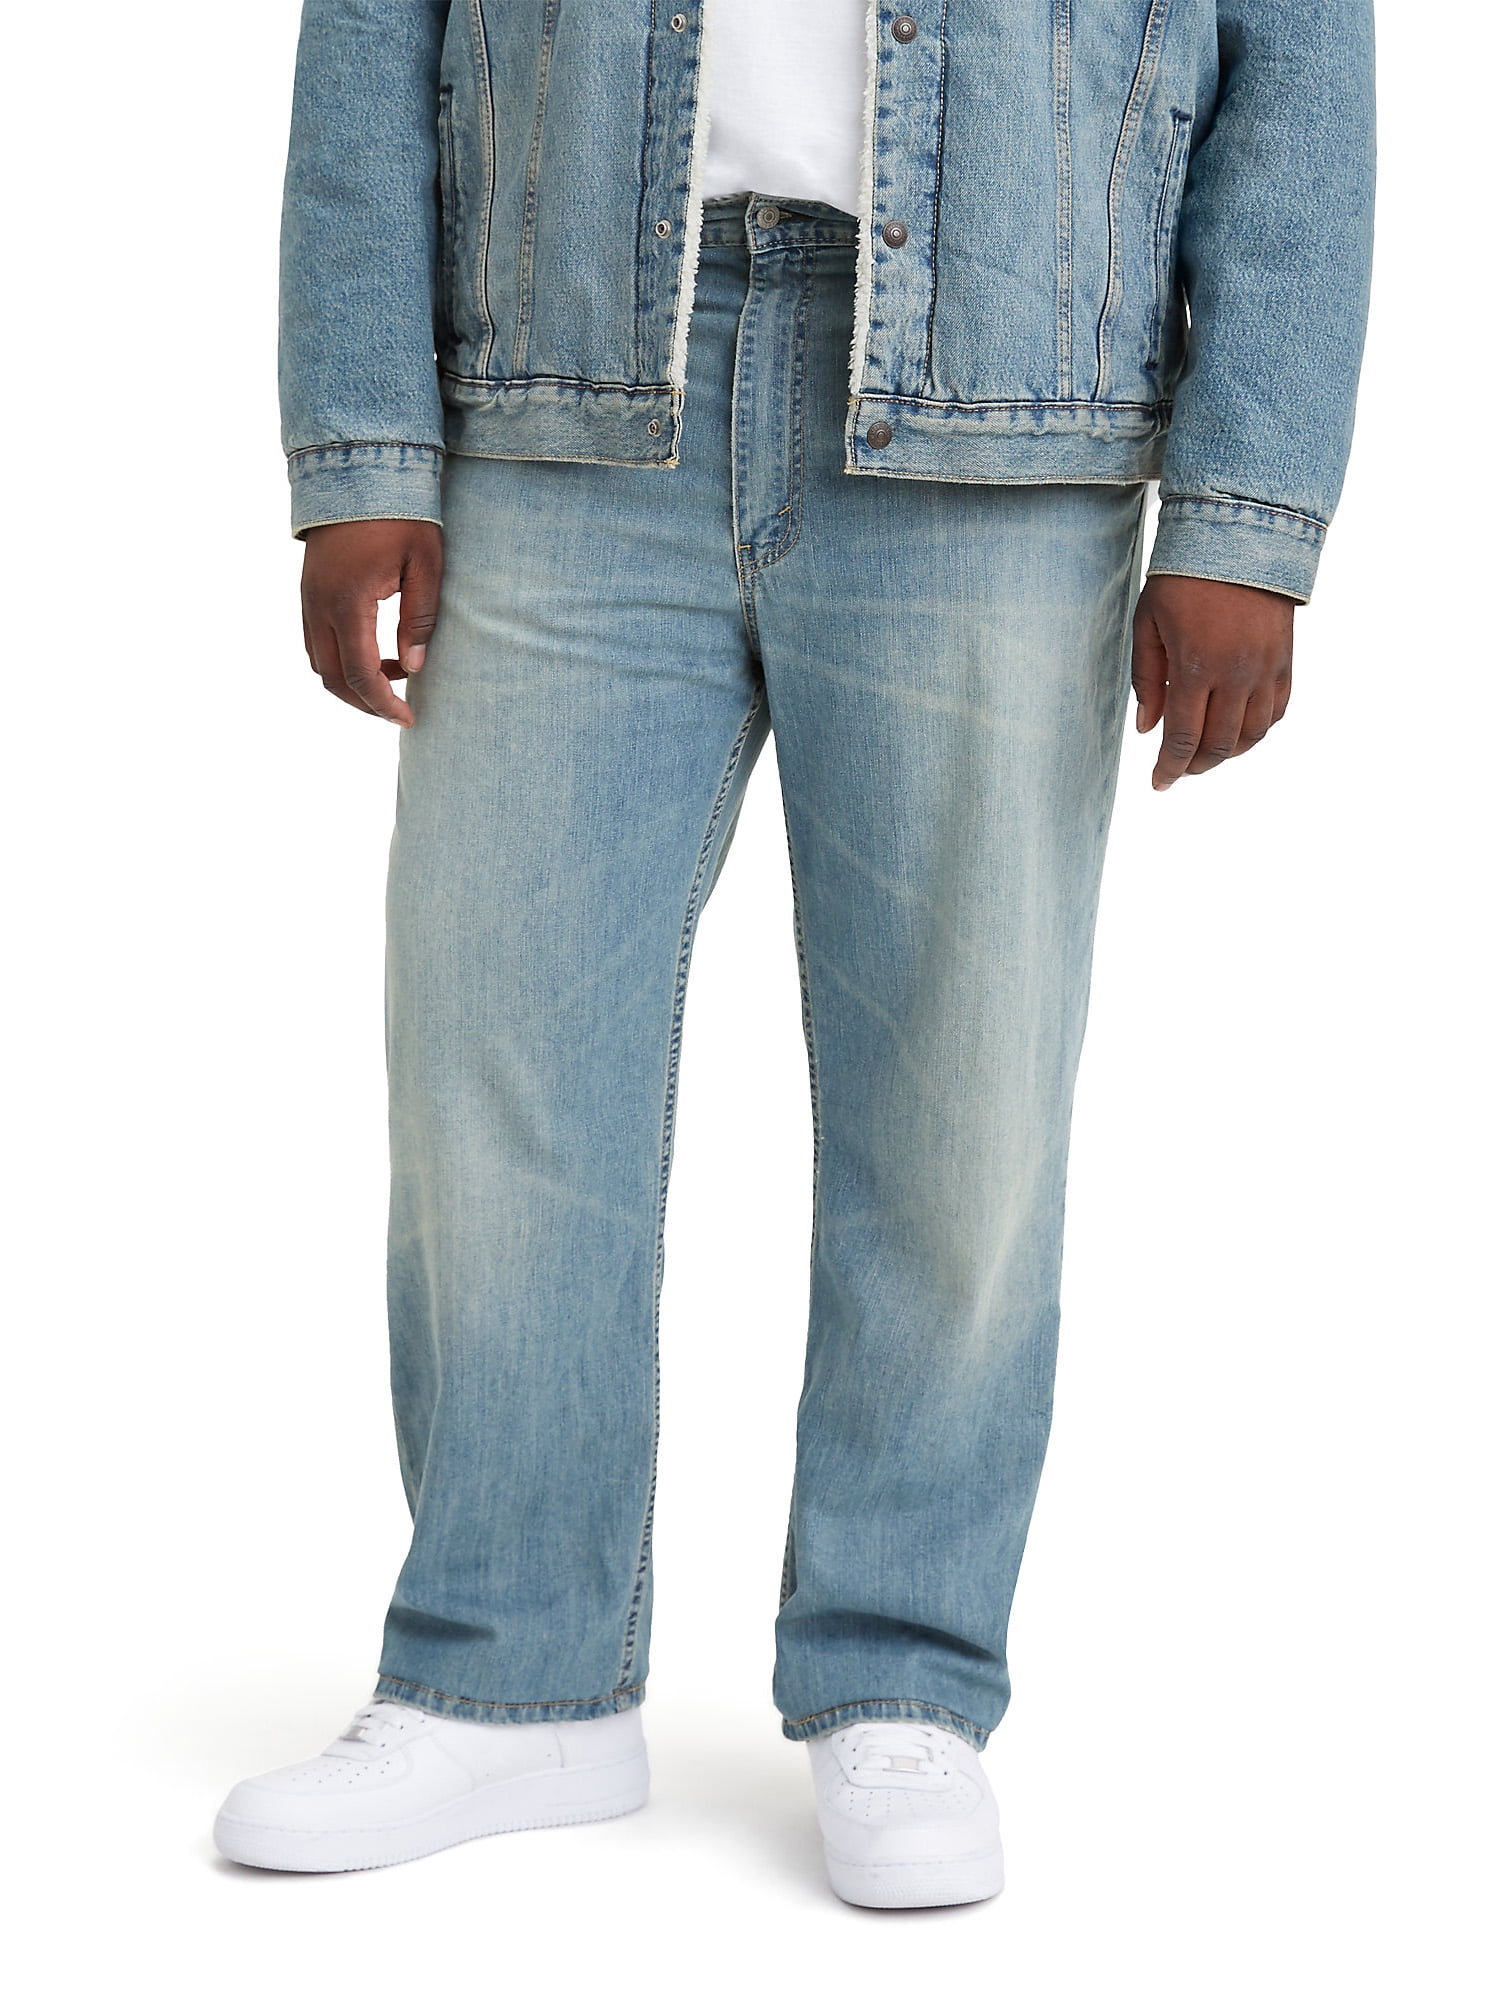 Levi's Men's Big & Tall 559 Relaxed Straight Fit Jeans - Walmart.com